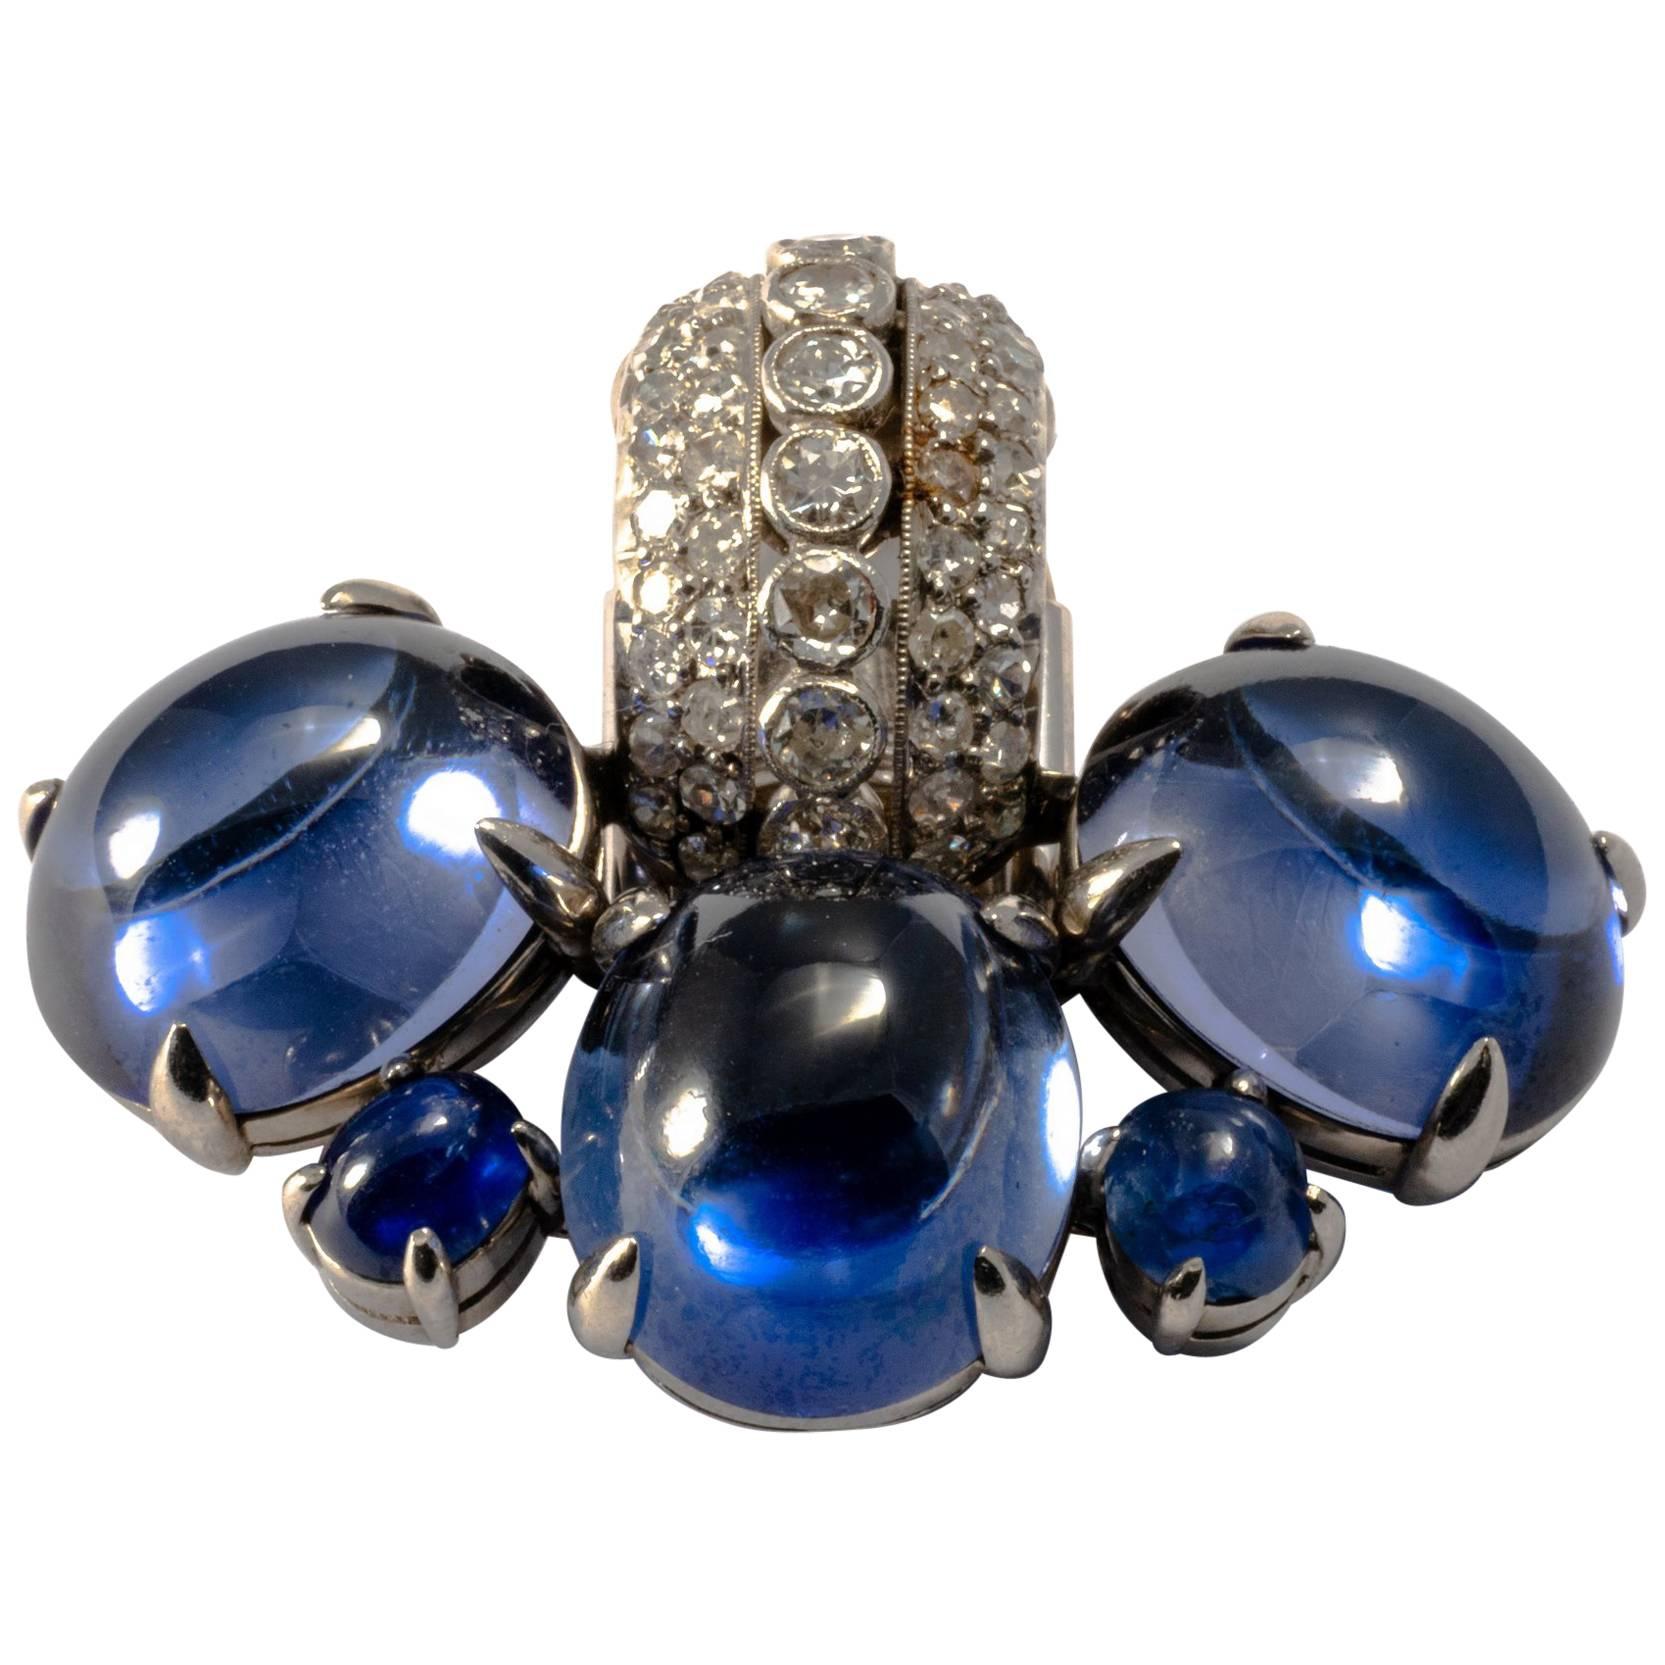 1980-1990 Cabochon Diamond and Sapphire 18K Gold Set Earrings and Pin Brooch For Sale